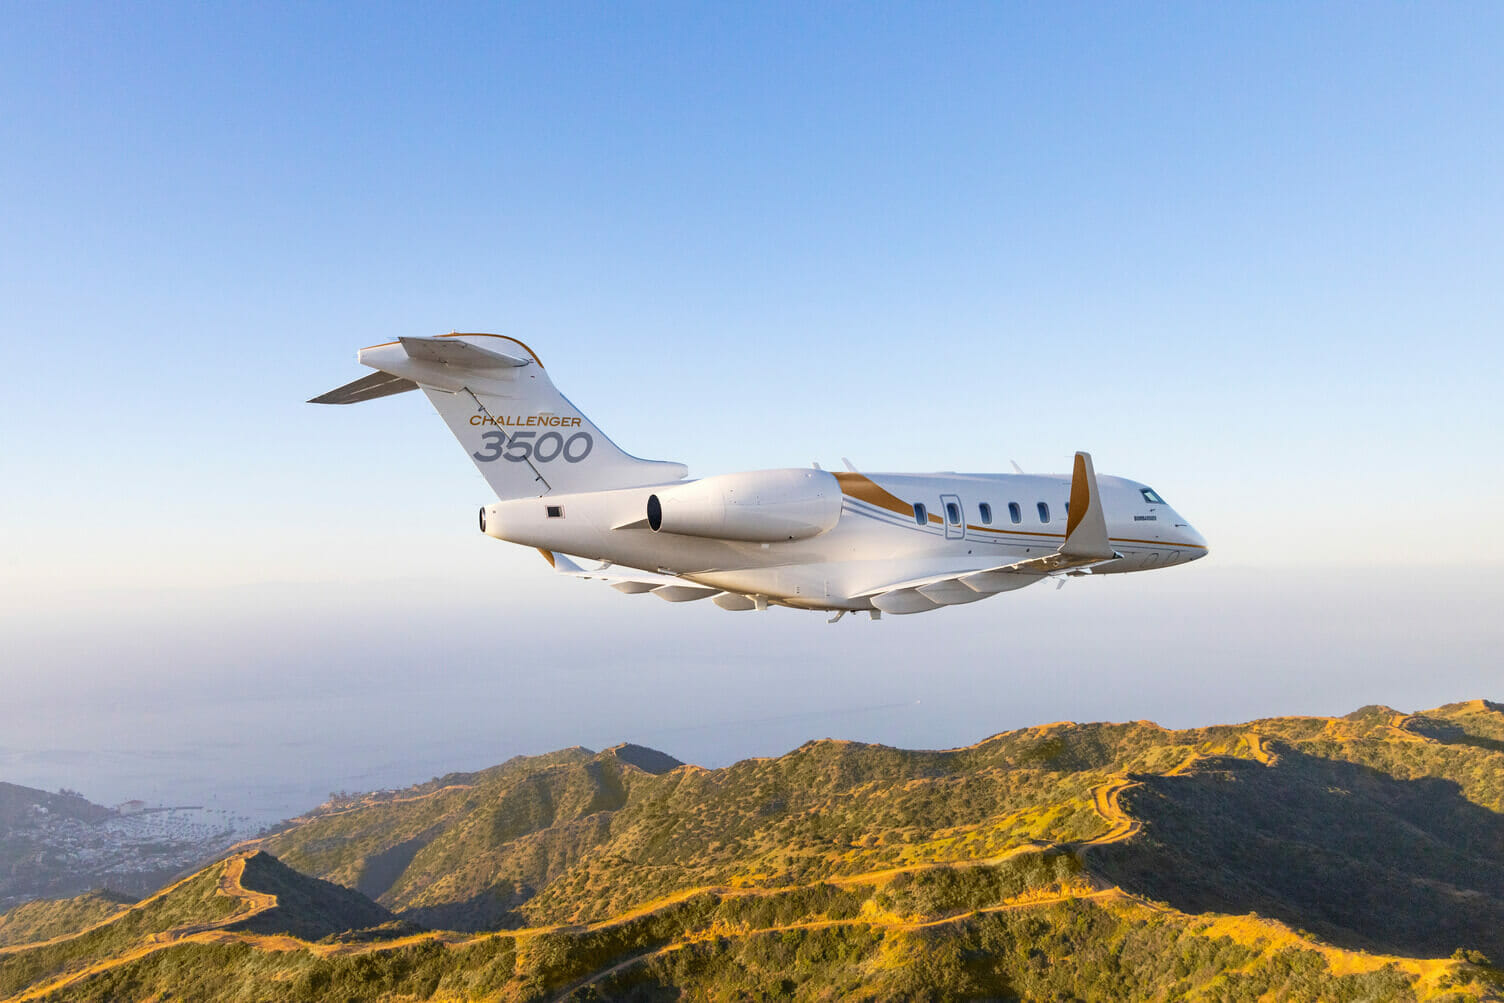 Bombardier Challenger 3500 Exterior during sunset flying over mountains - private jet charter safety ratings